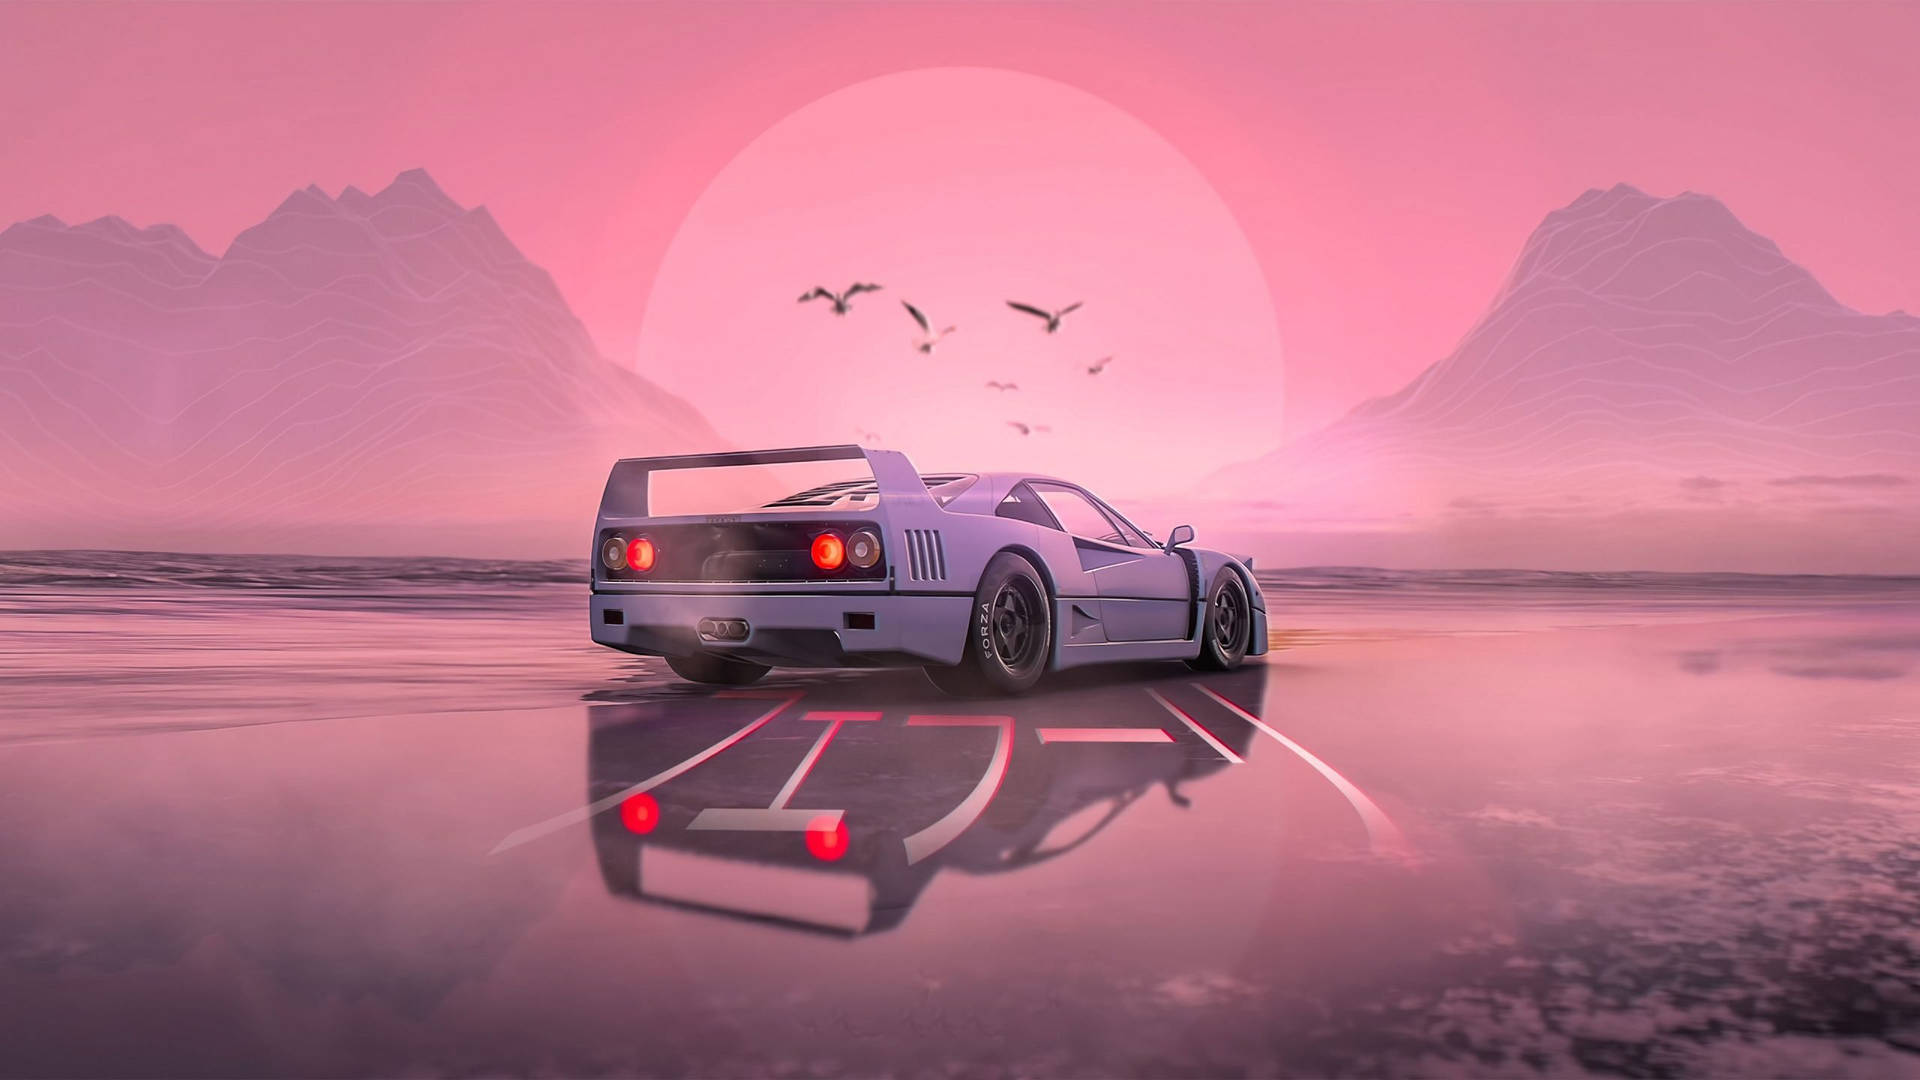 Pink Aesthetic Car On Water For Computer Background